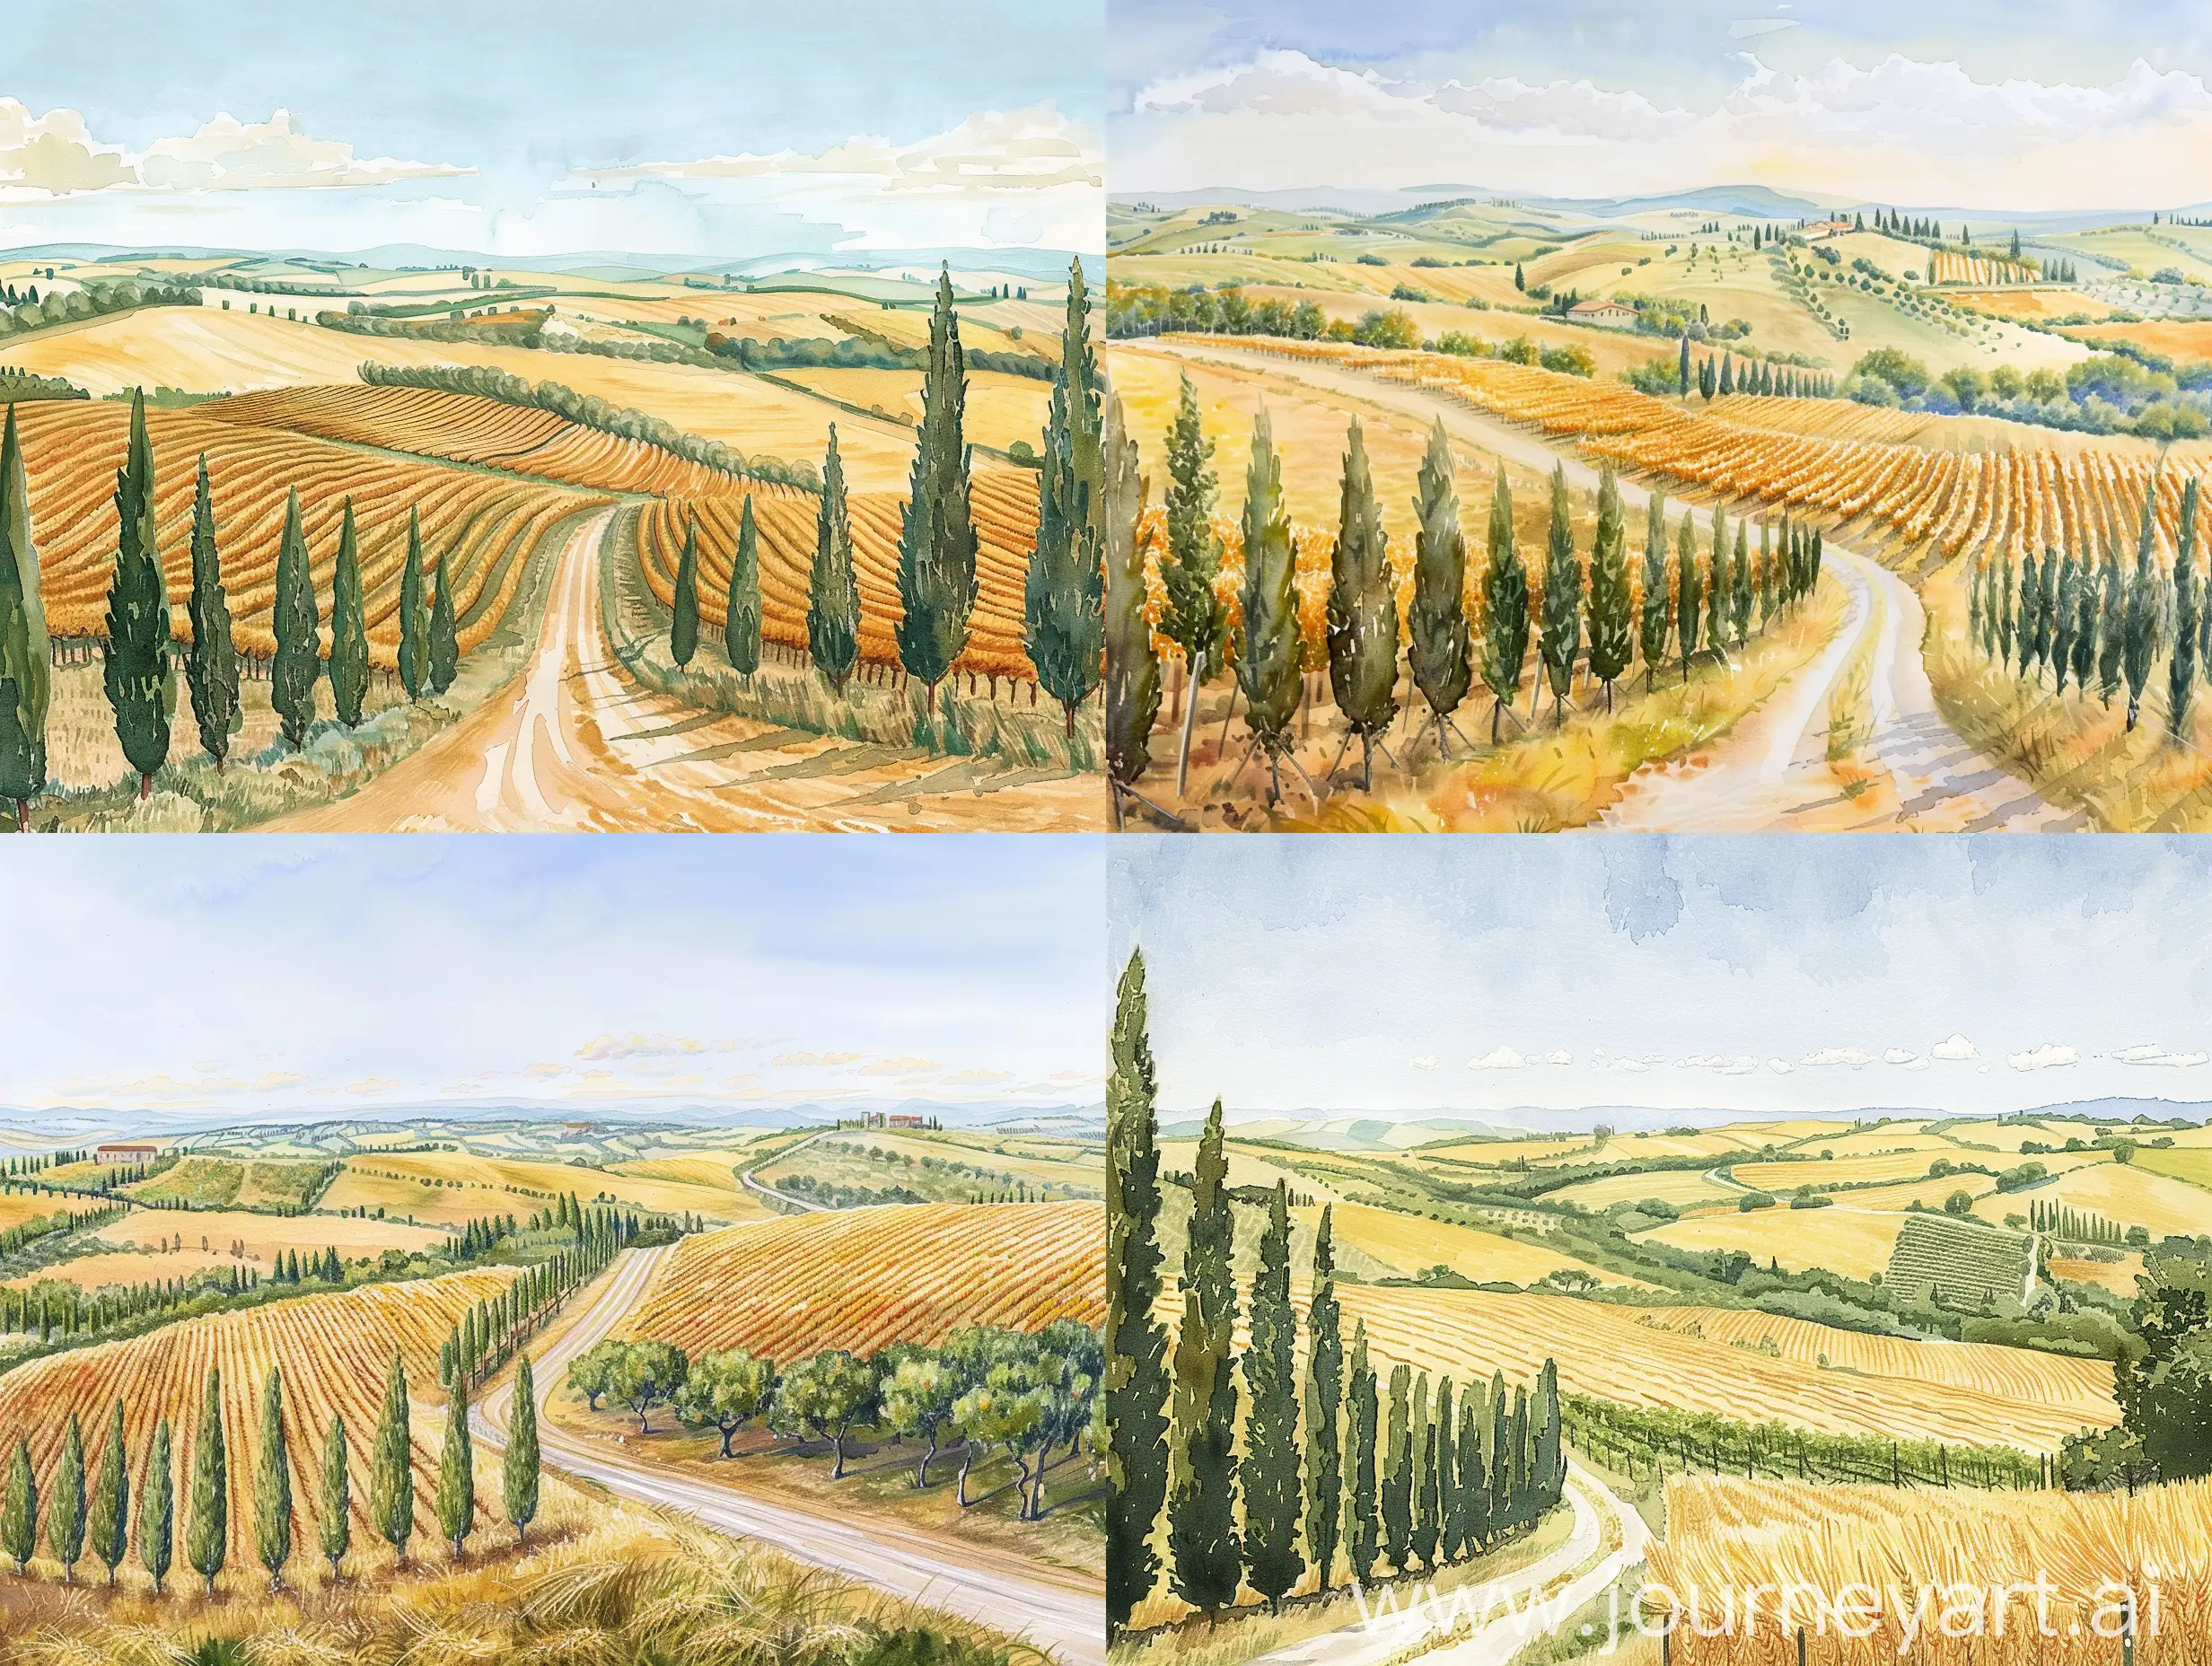 Tuscany distant view from above to the horizon, full summer, roads lined with slender trees, fields, vineyards, a golden field of wheat billowing in the summer wind, with a light blue sky and a few clouds scattered over the horizon. Style: Watercolor